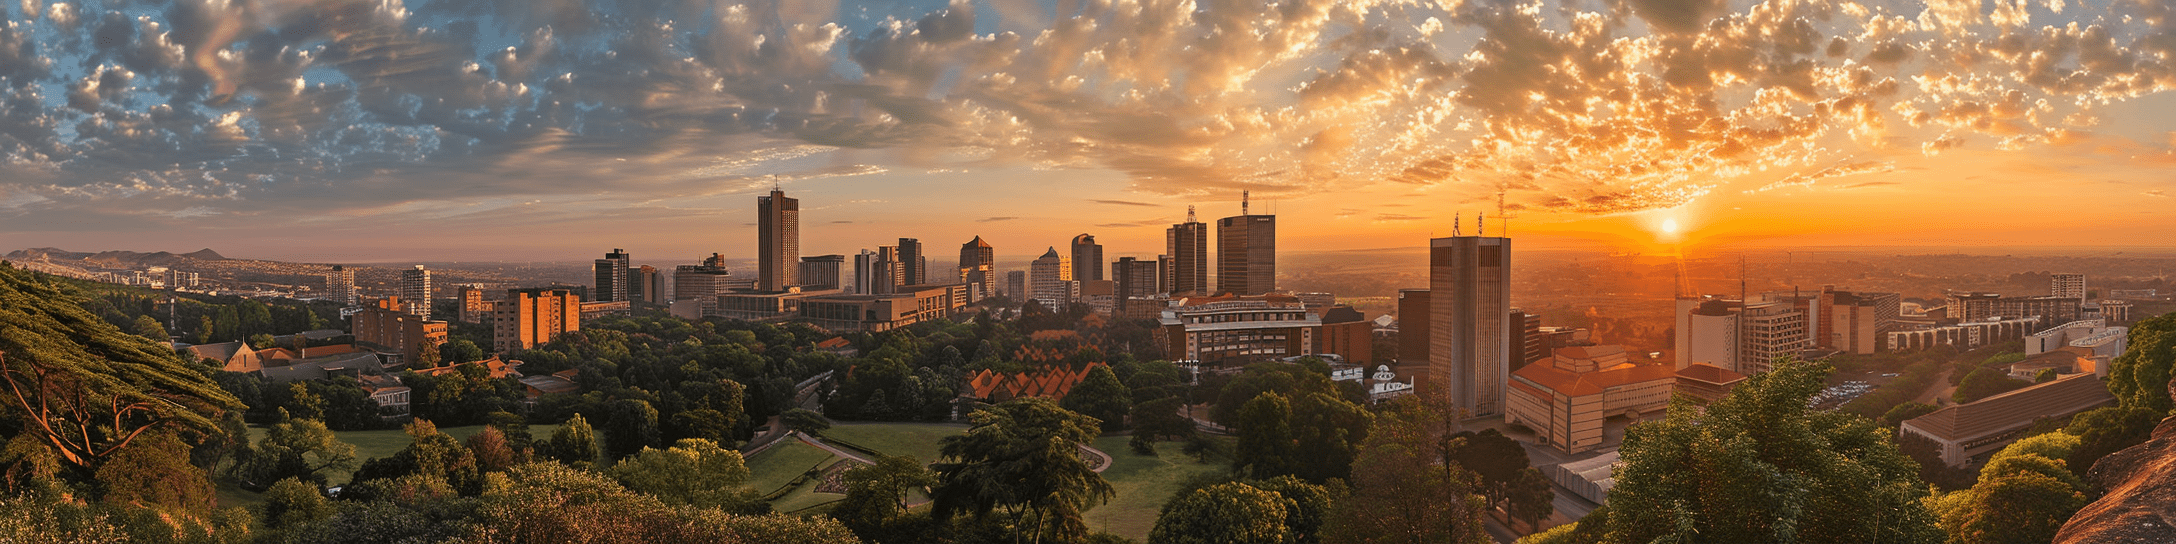 Sunset over Pretoria with panoramic view of the city skyline and lush greenery